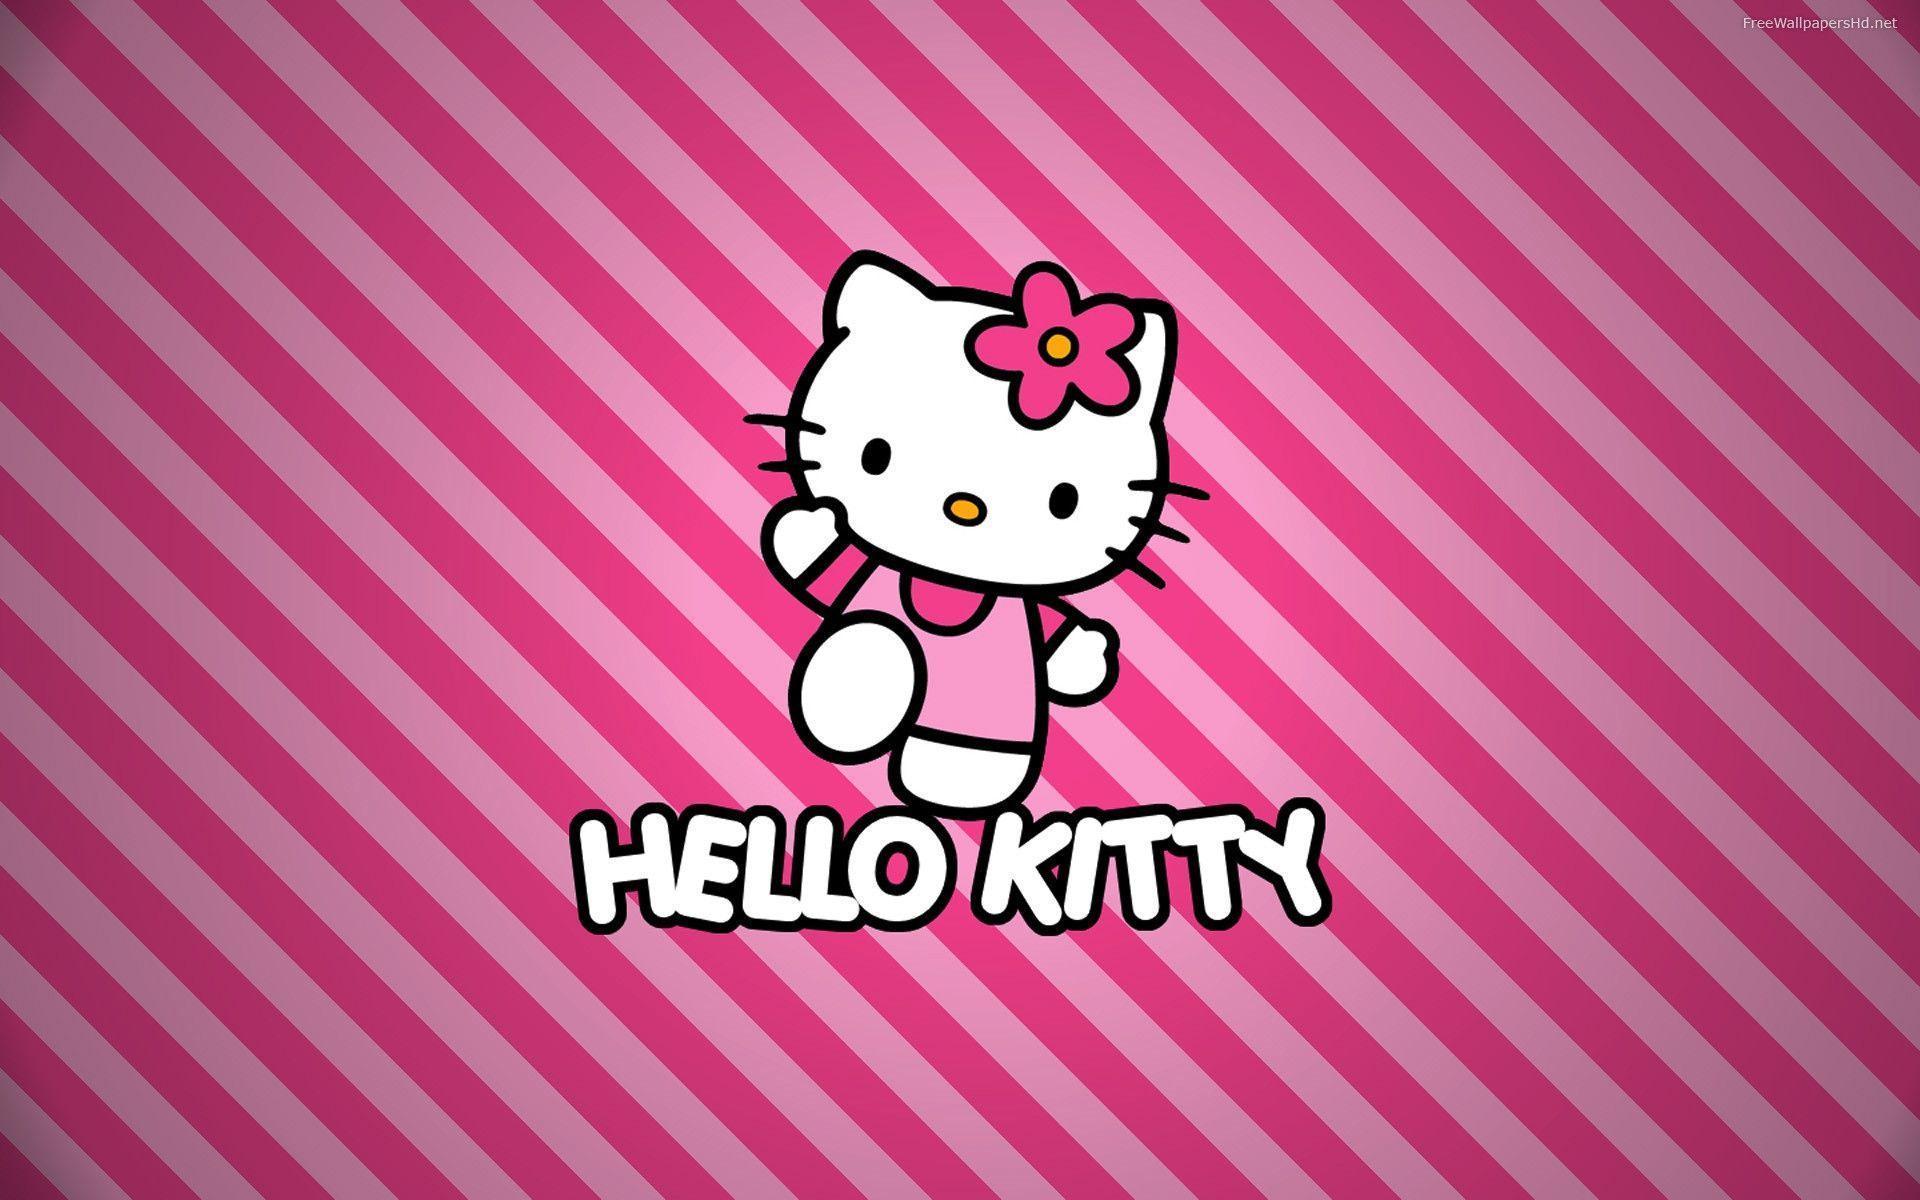 Glitter Hello Kitty Live Wallpaper Free Android Live Wallpaper download   Download the Free Glitter Hello Kitty Live Wallpaper Live Wallpaper to your  Android phone or tablet